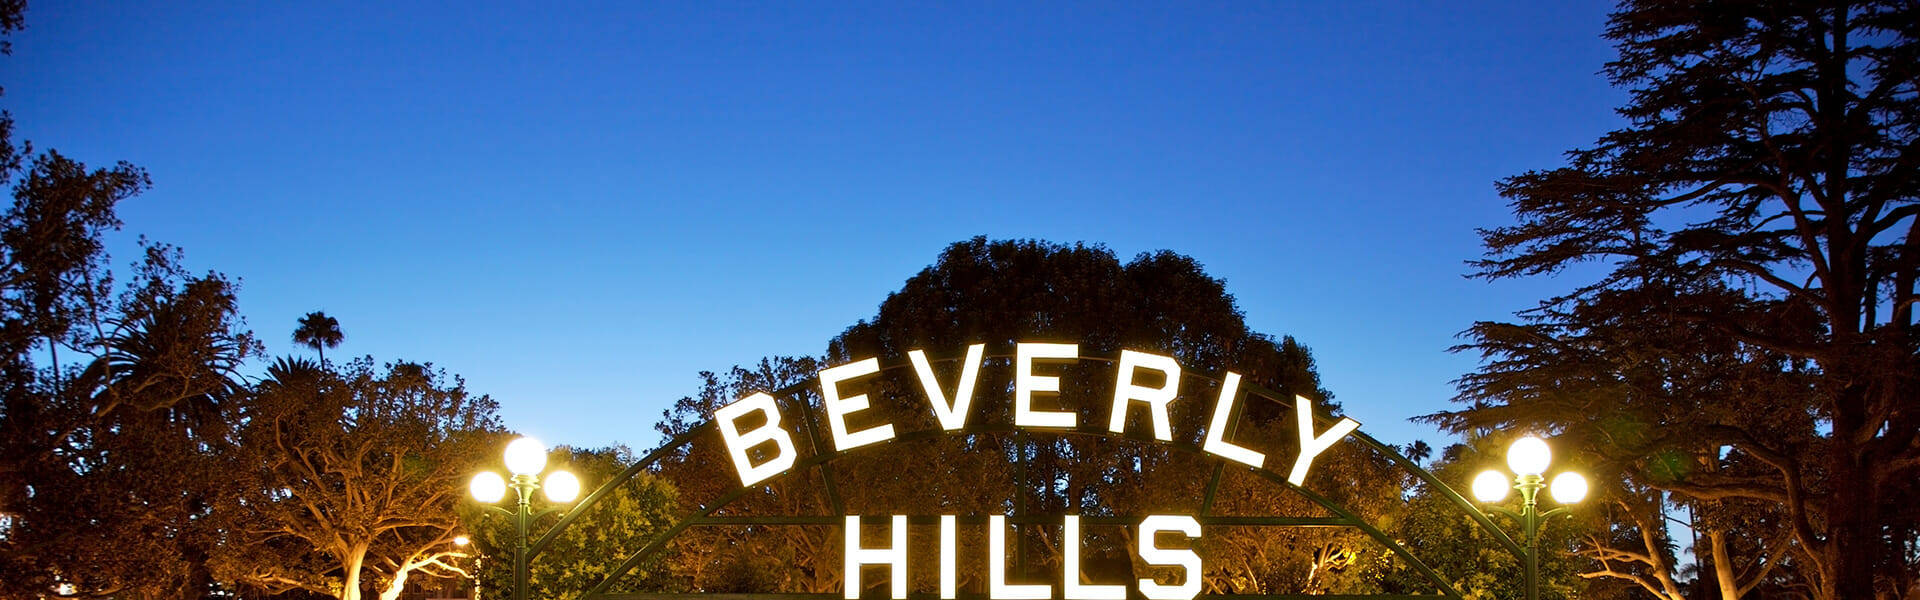 Beverly Hills Information, Resources and News – All things Beverly Hills